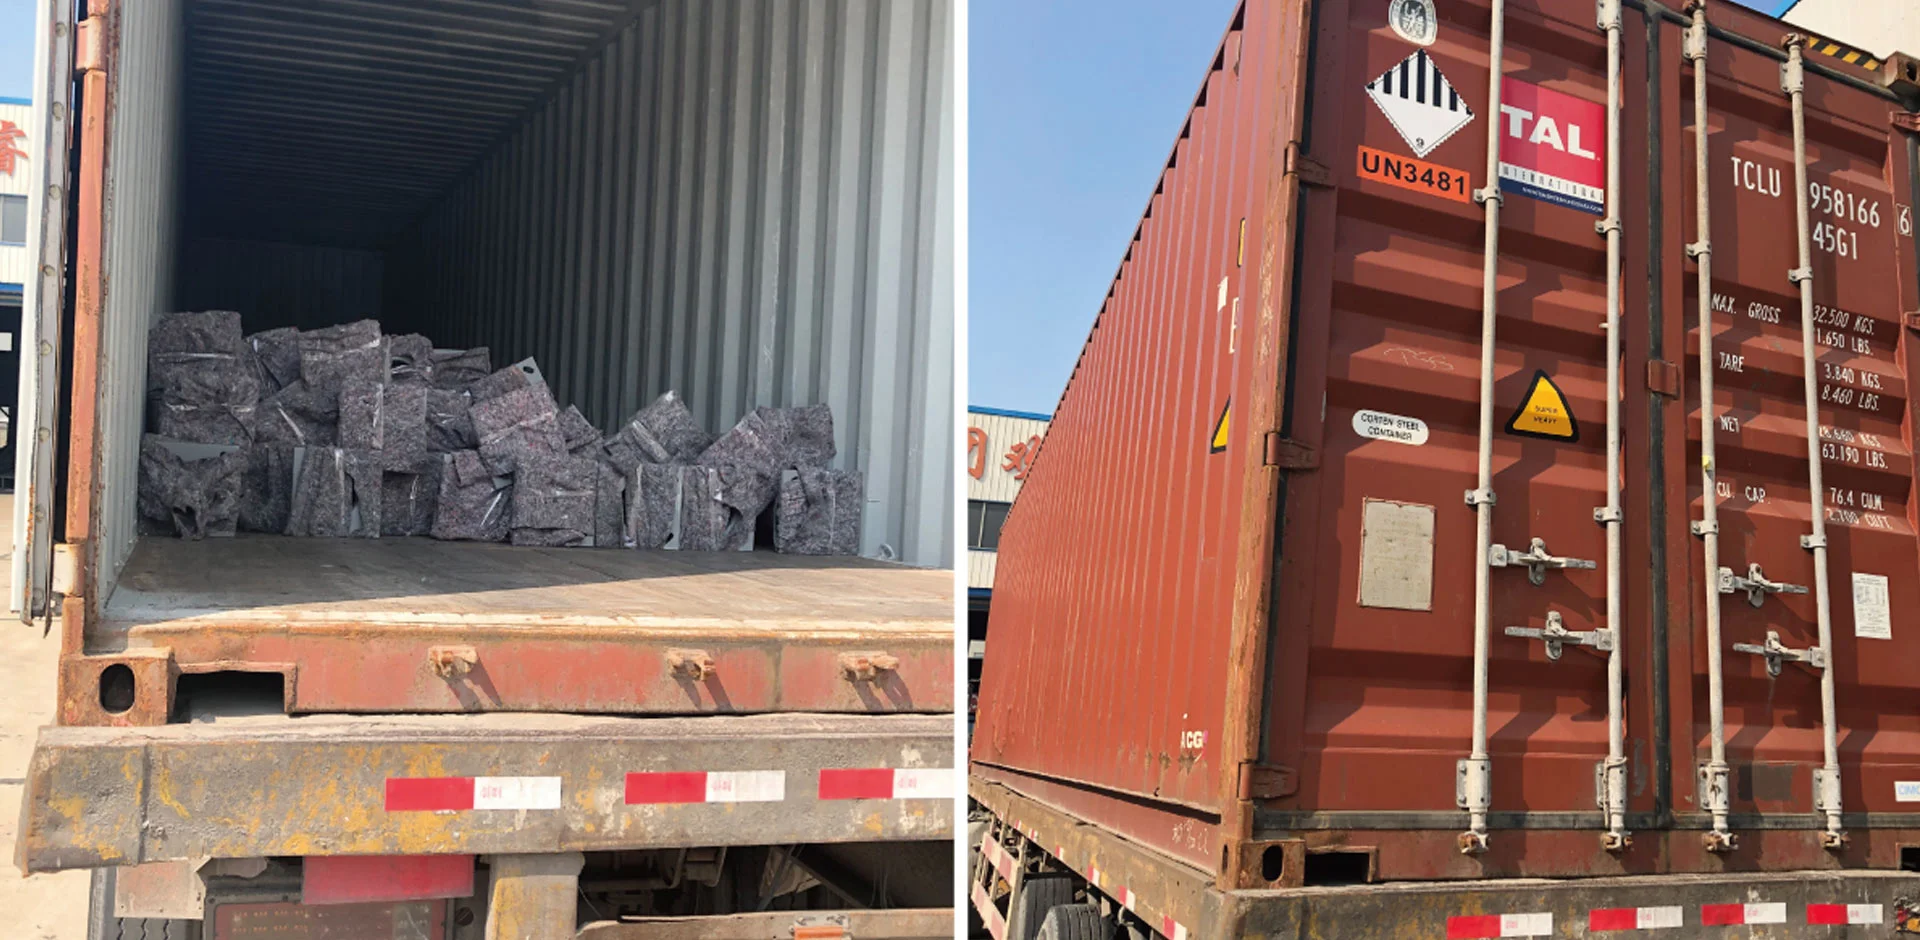 April's First Container of Solar Street Lighting Had Been Loaded